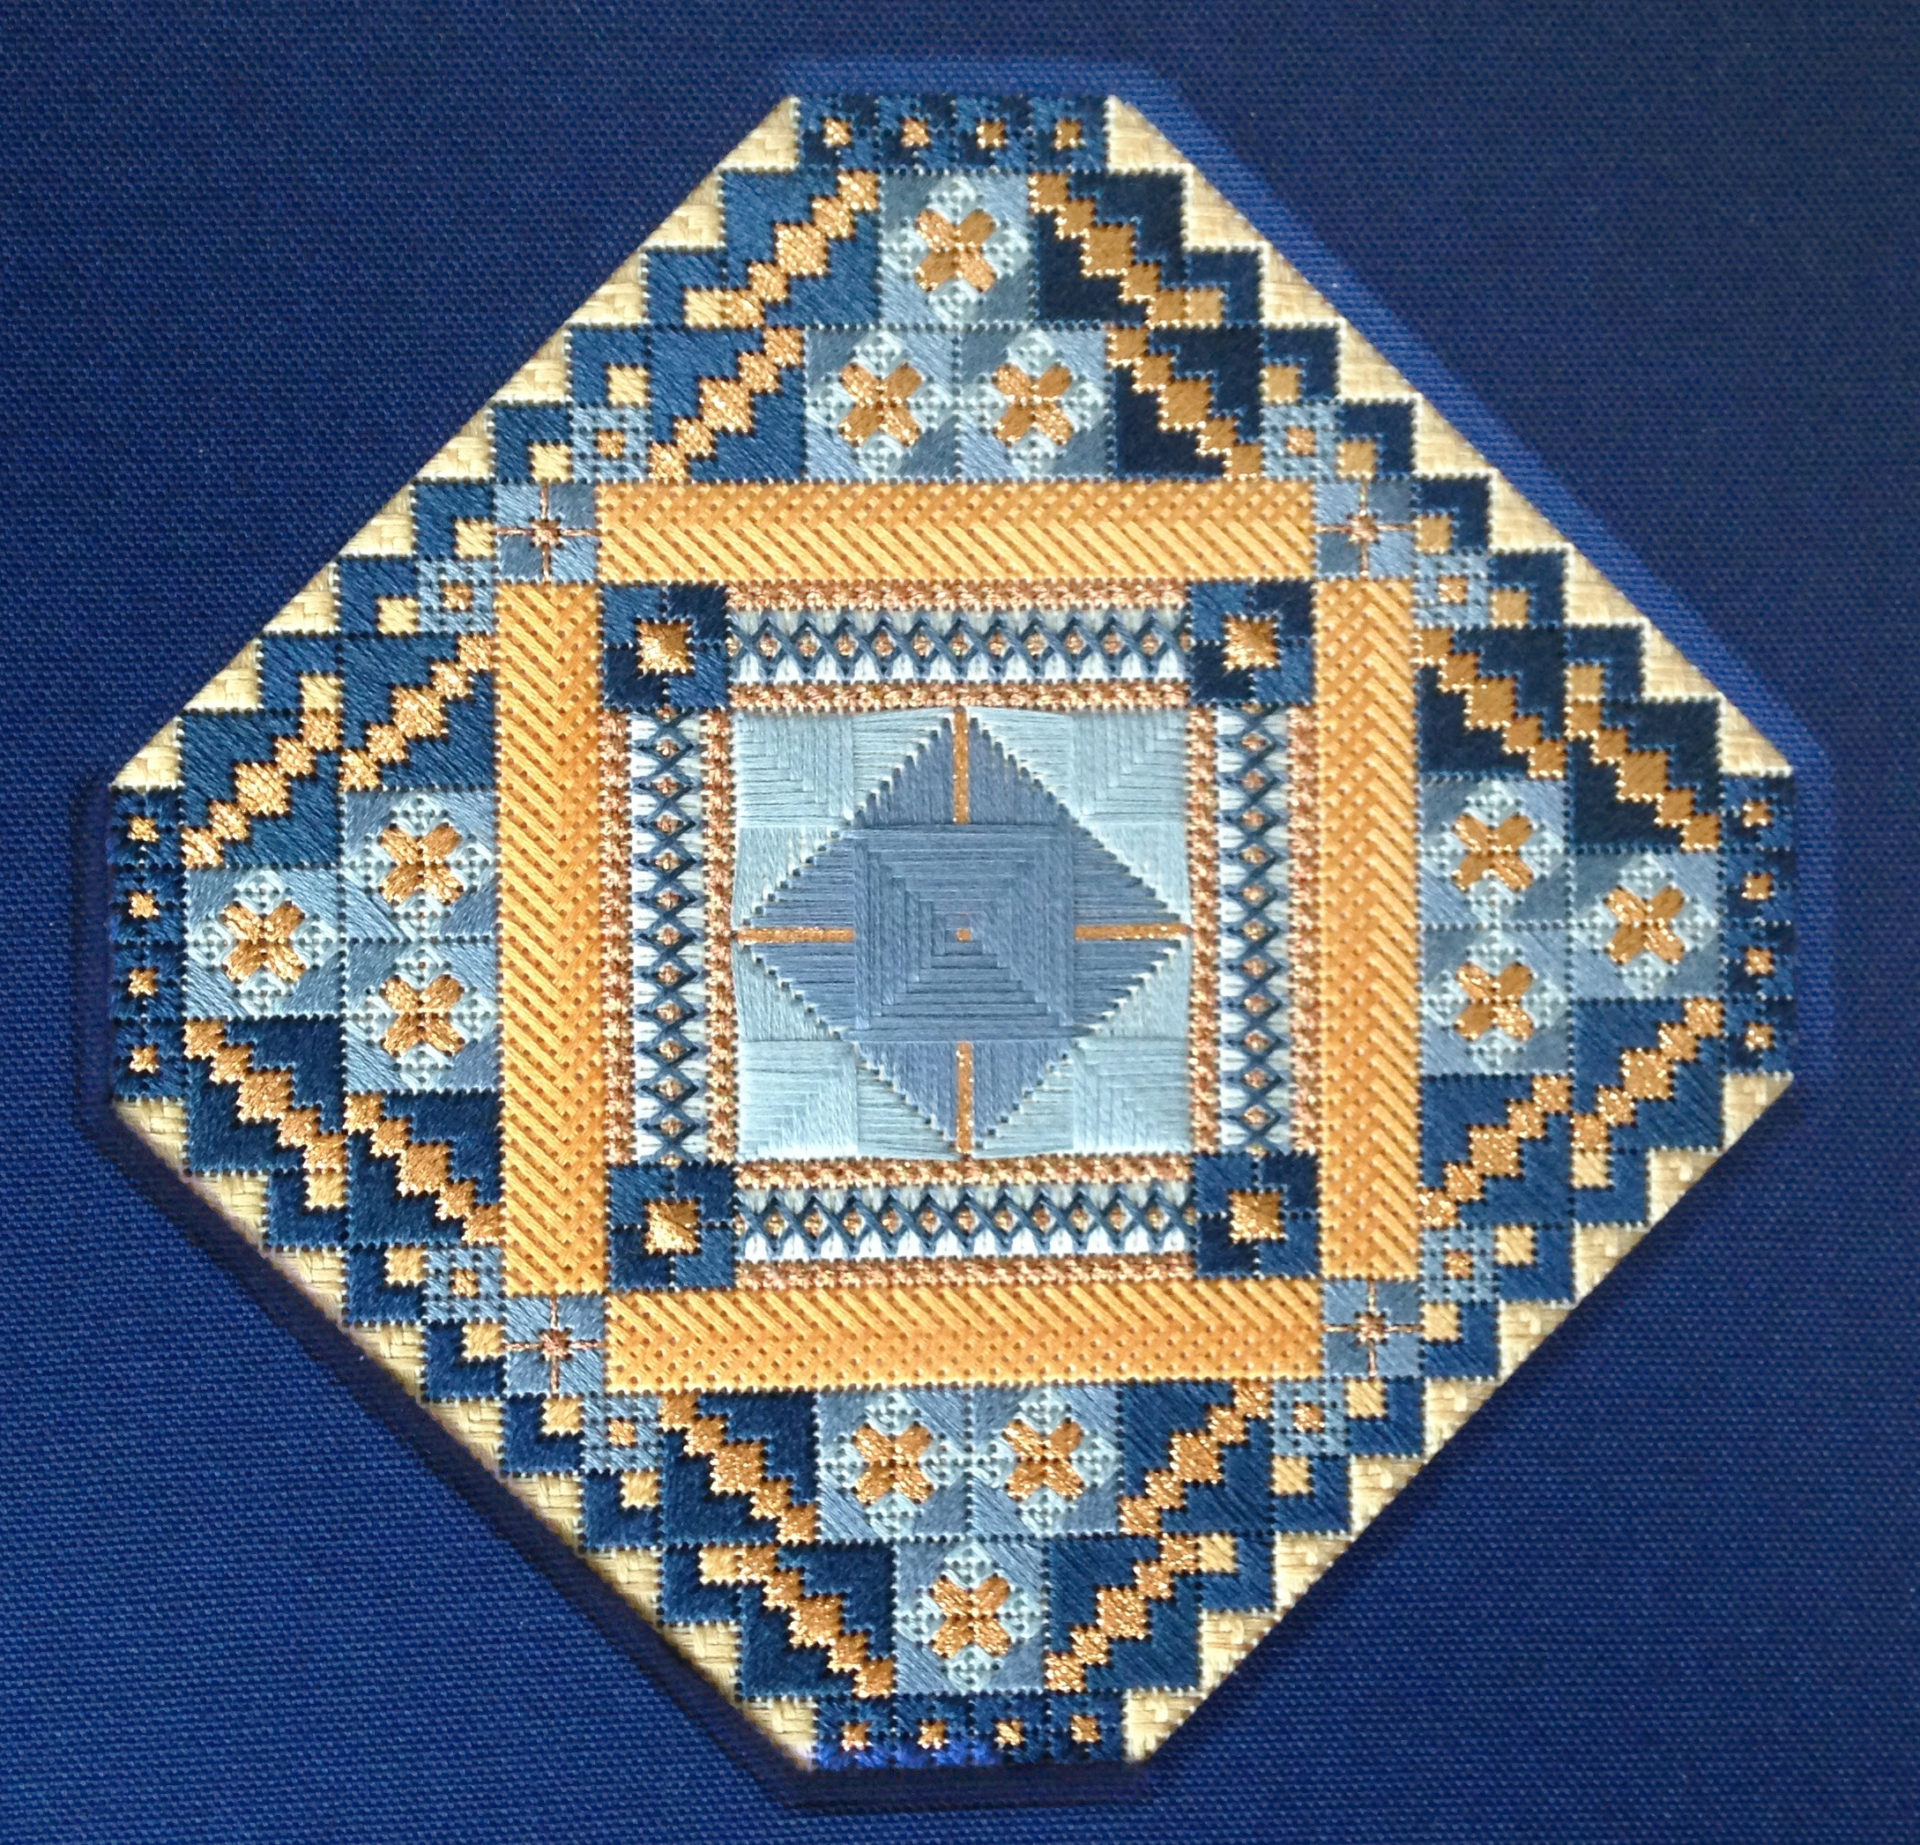 Mexican Tile in Main Colorway: Blue and Apricot